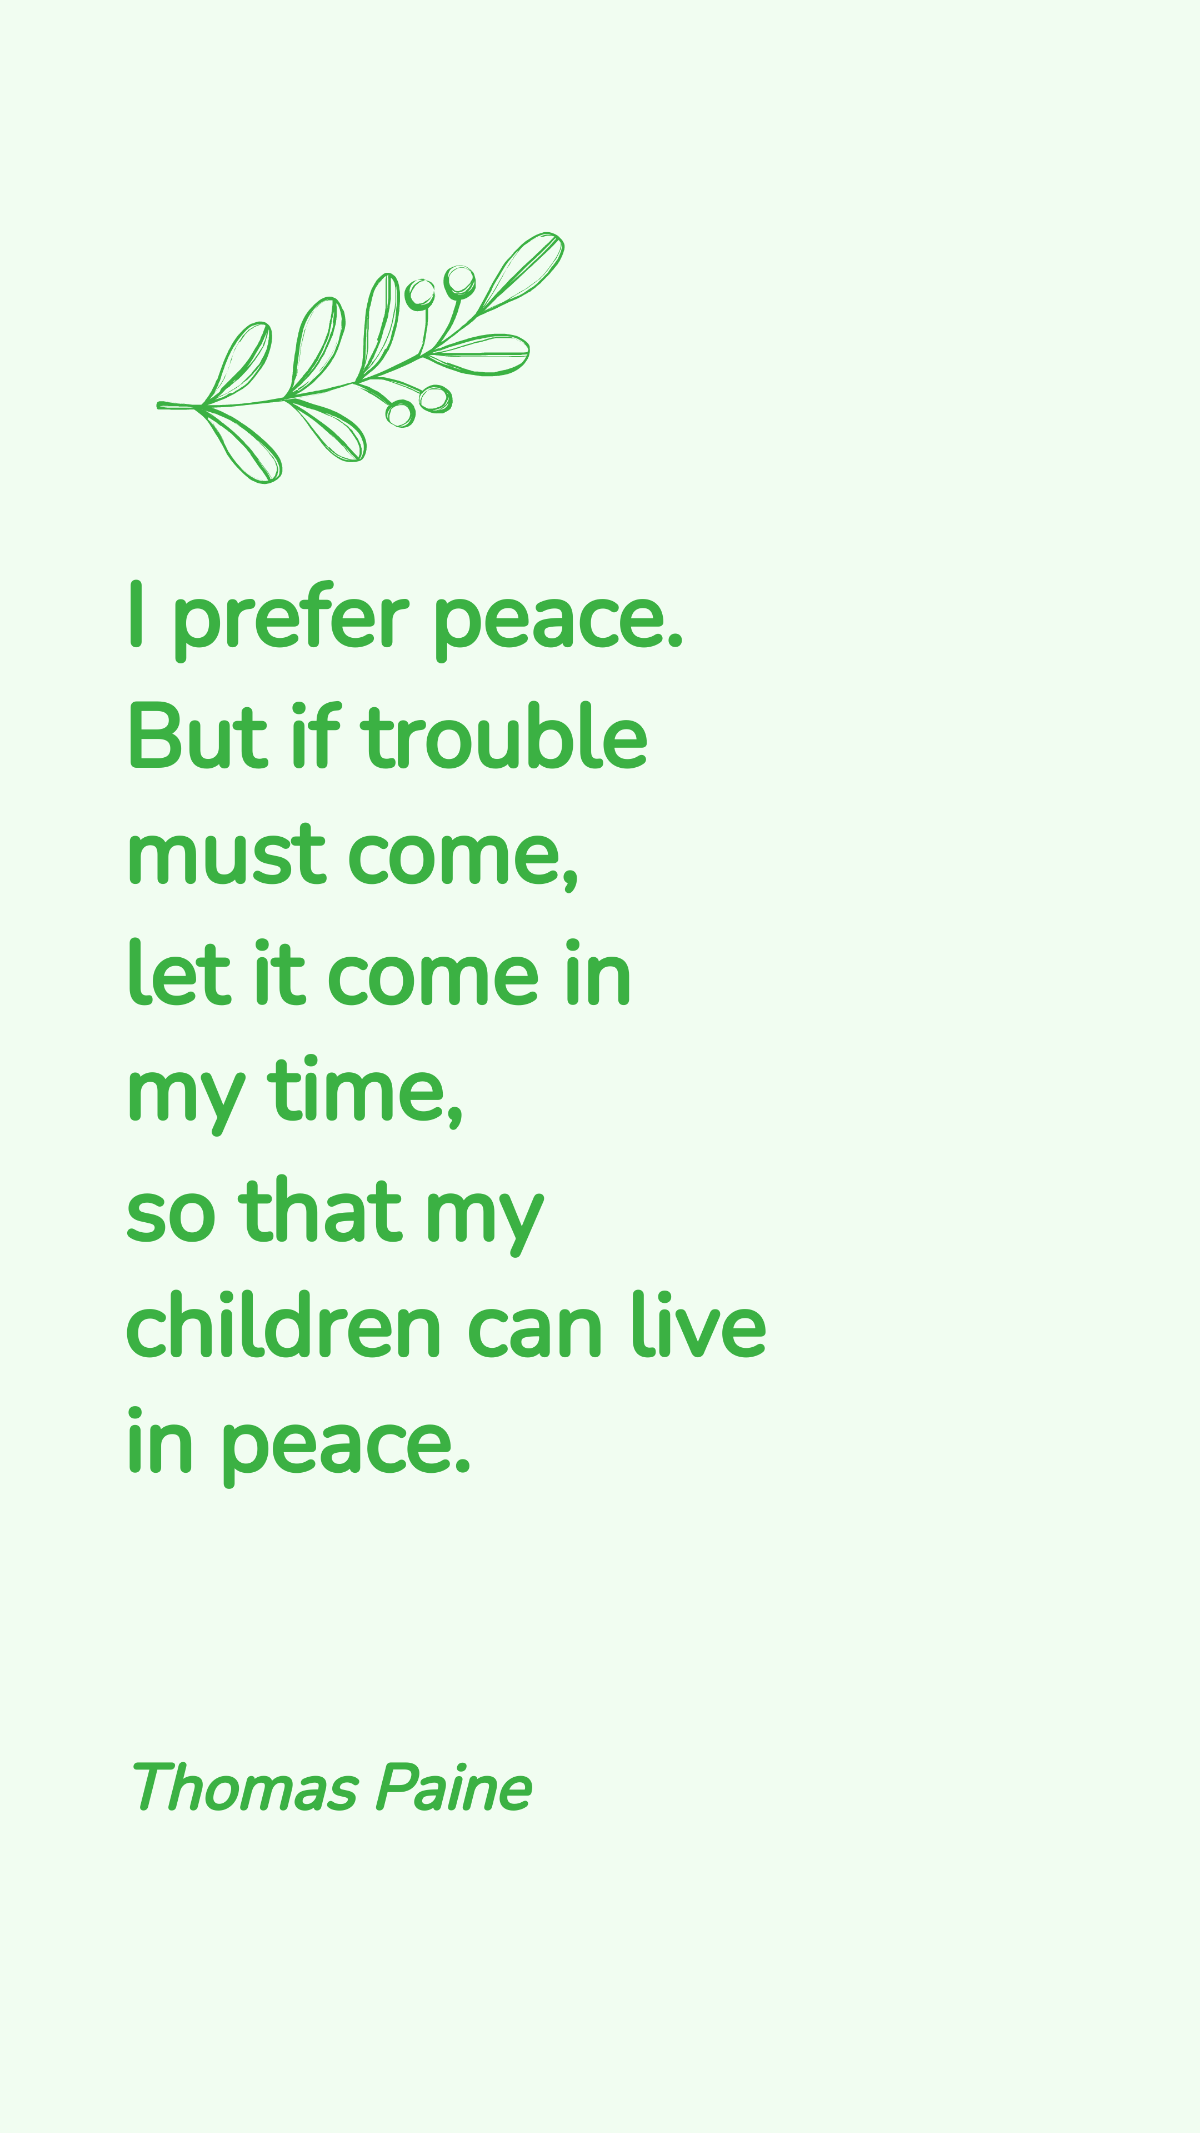 Thomas Paine - I prefer peace. But if trouble must come, let it come in my time, so that my children can live in peace. 